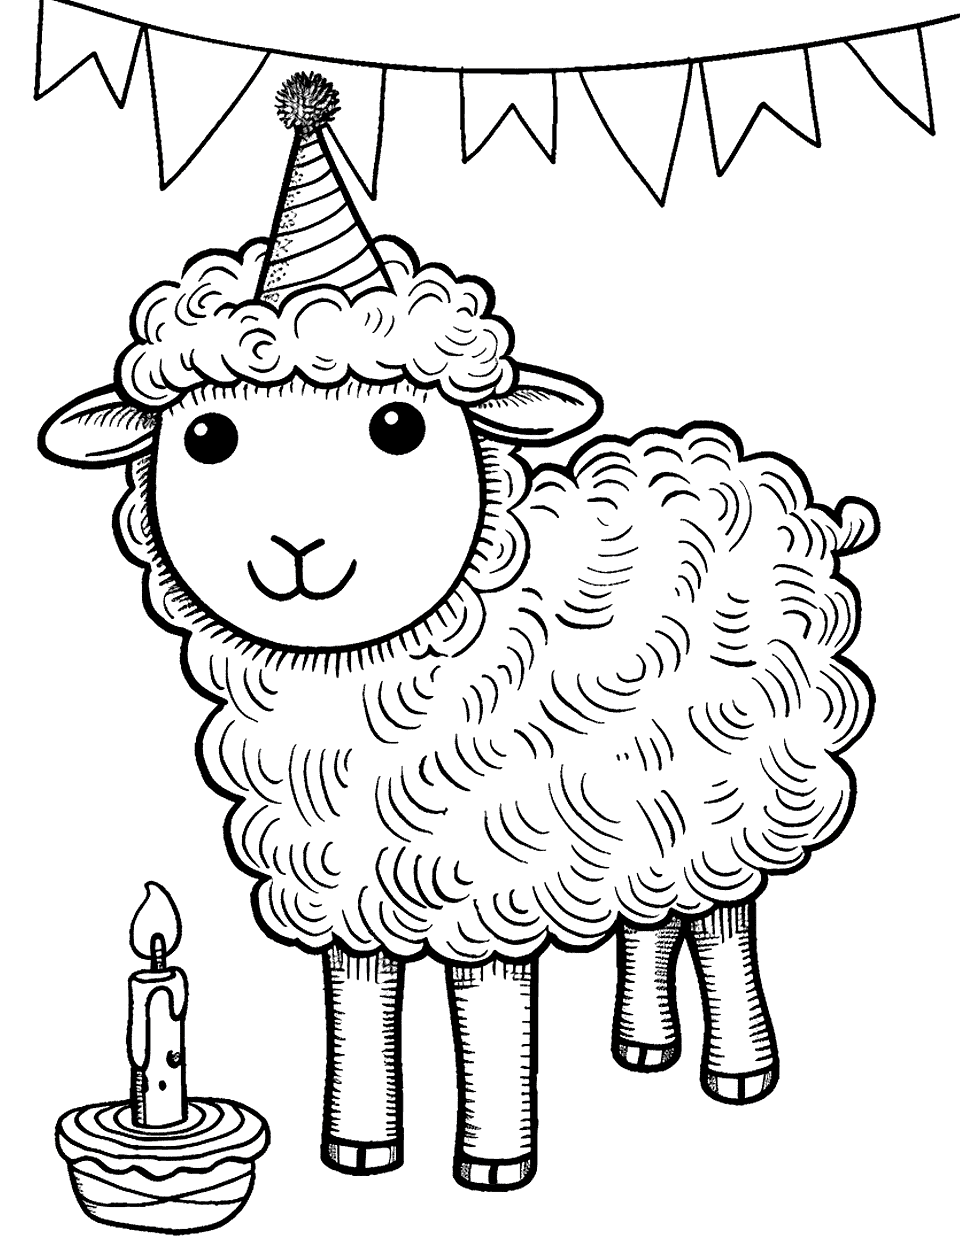 Birthday Party Sheep Coloring Page - A sheep wearing a party hat beside a small cake with candles in a festive setting.